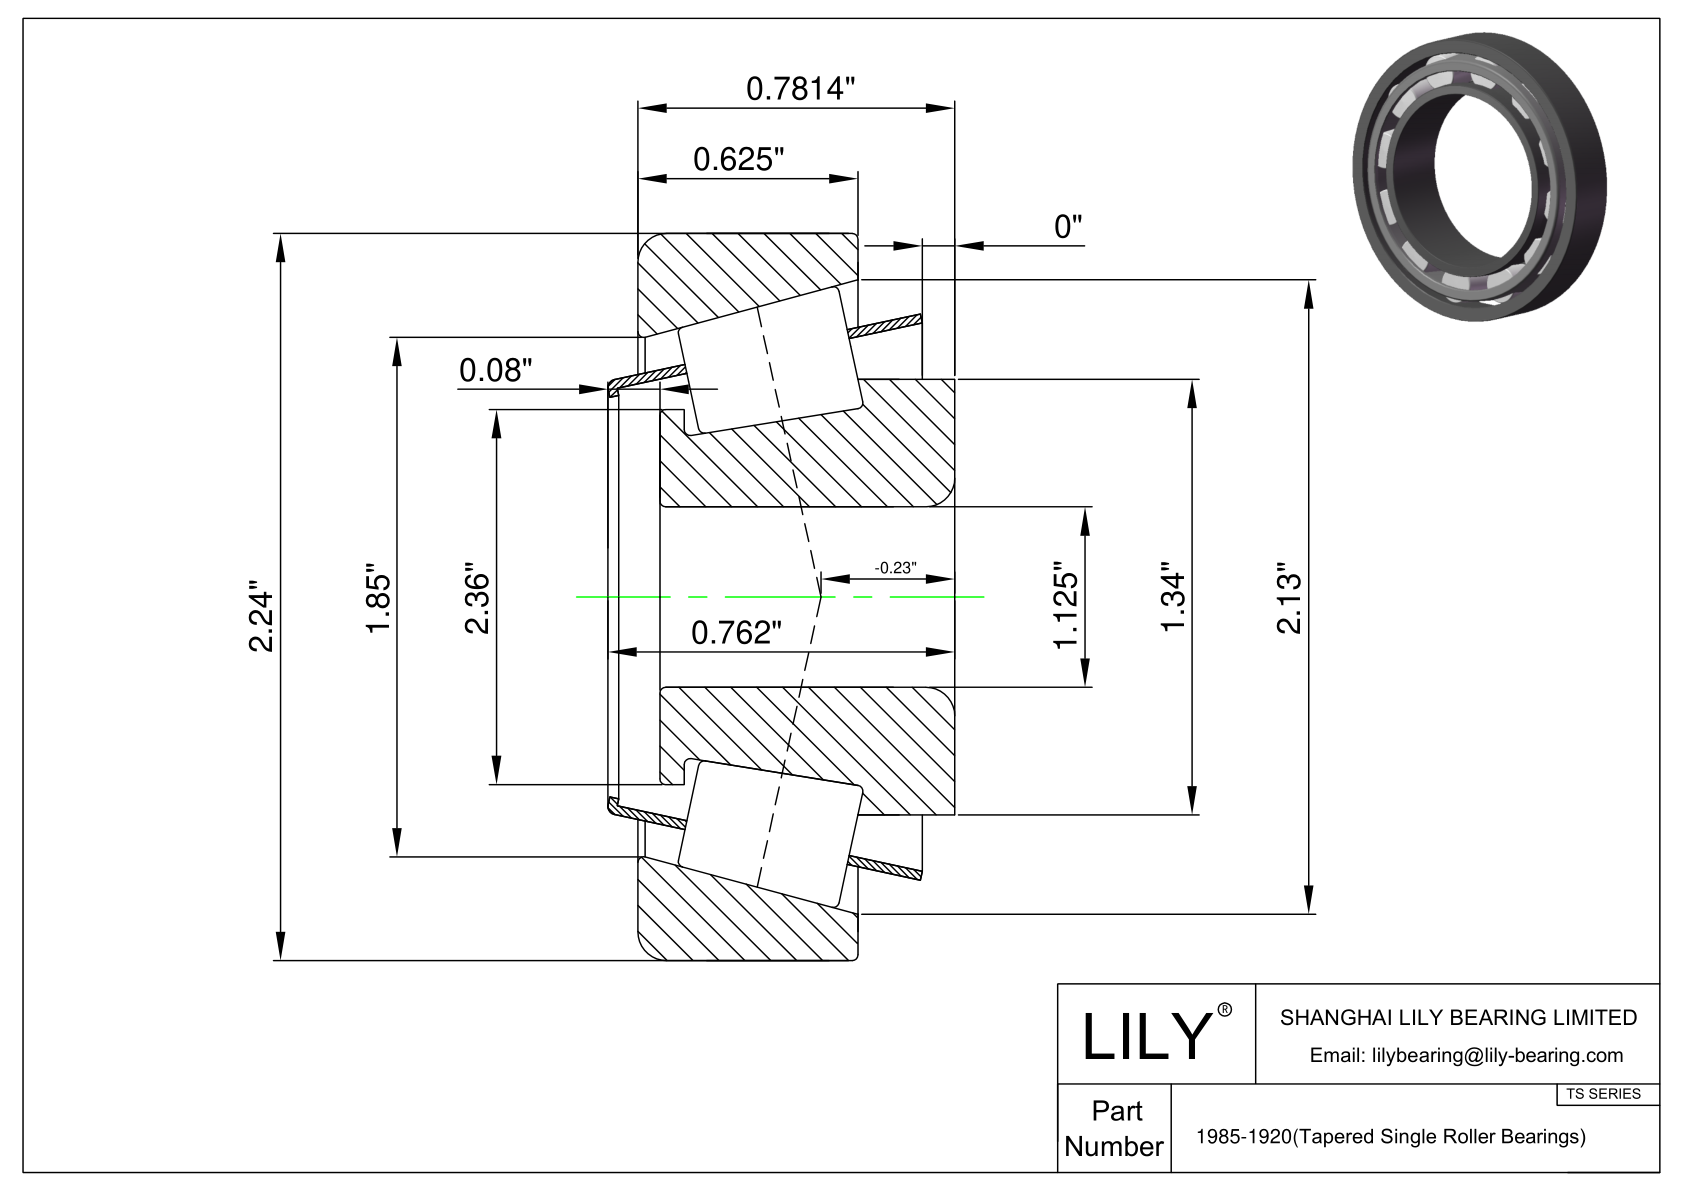 1985-1920 TS (Tapered Single Roller Bearings) (Imperial) cad drawing